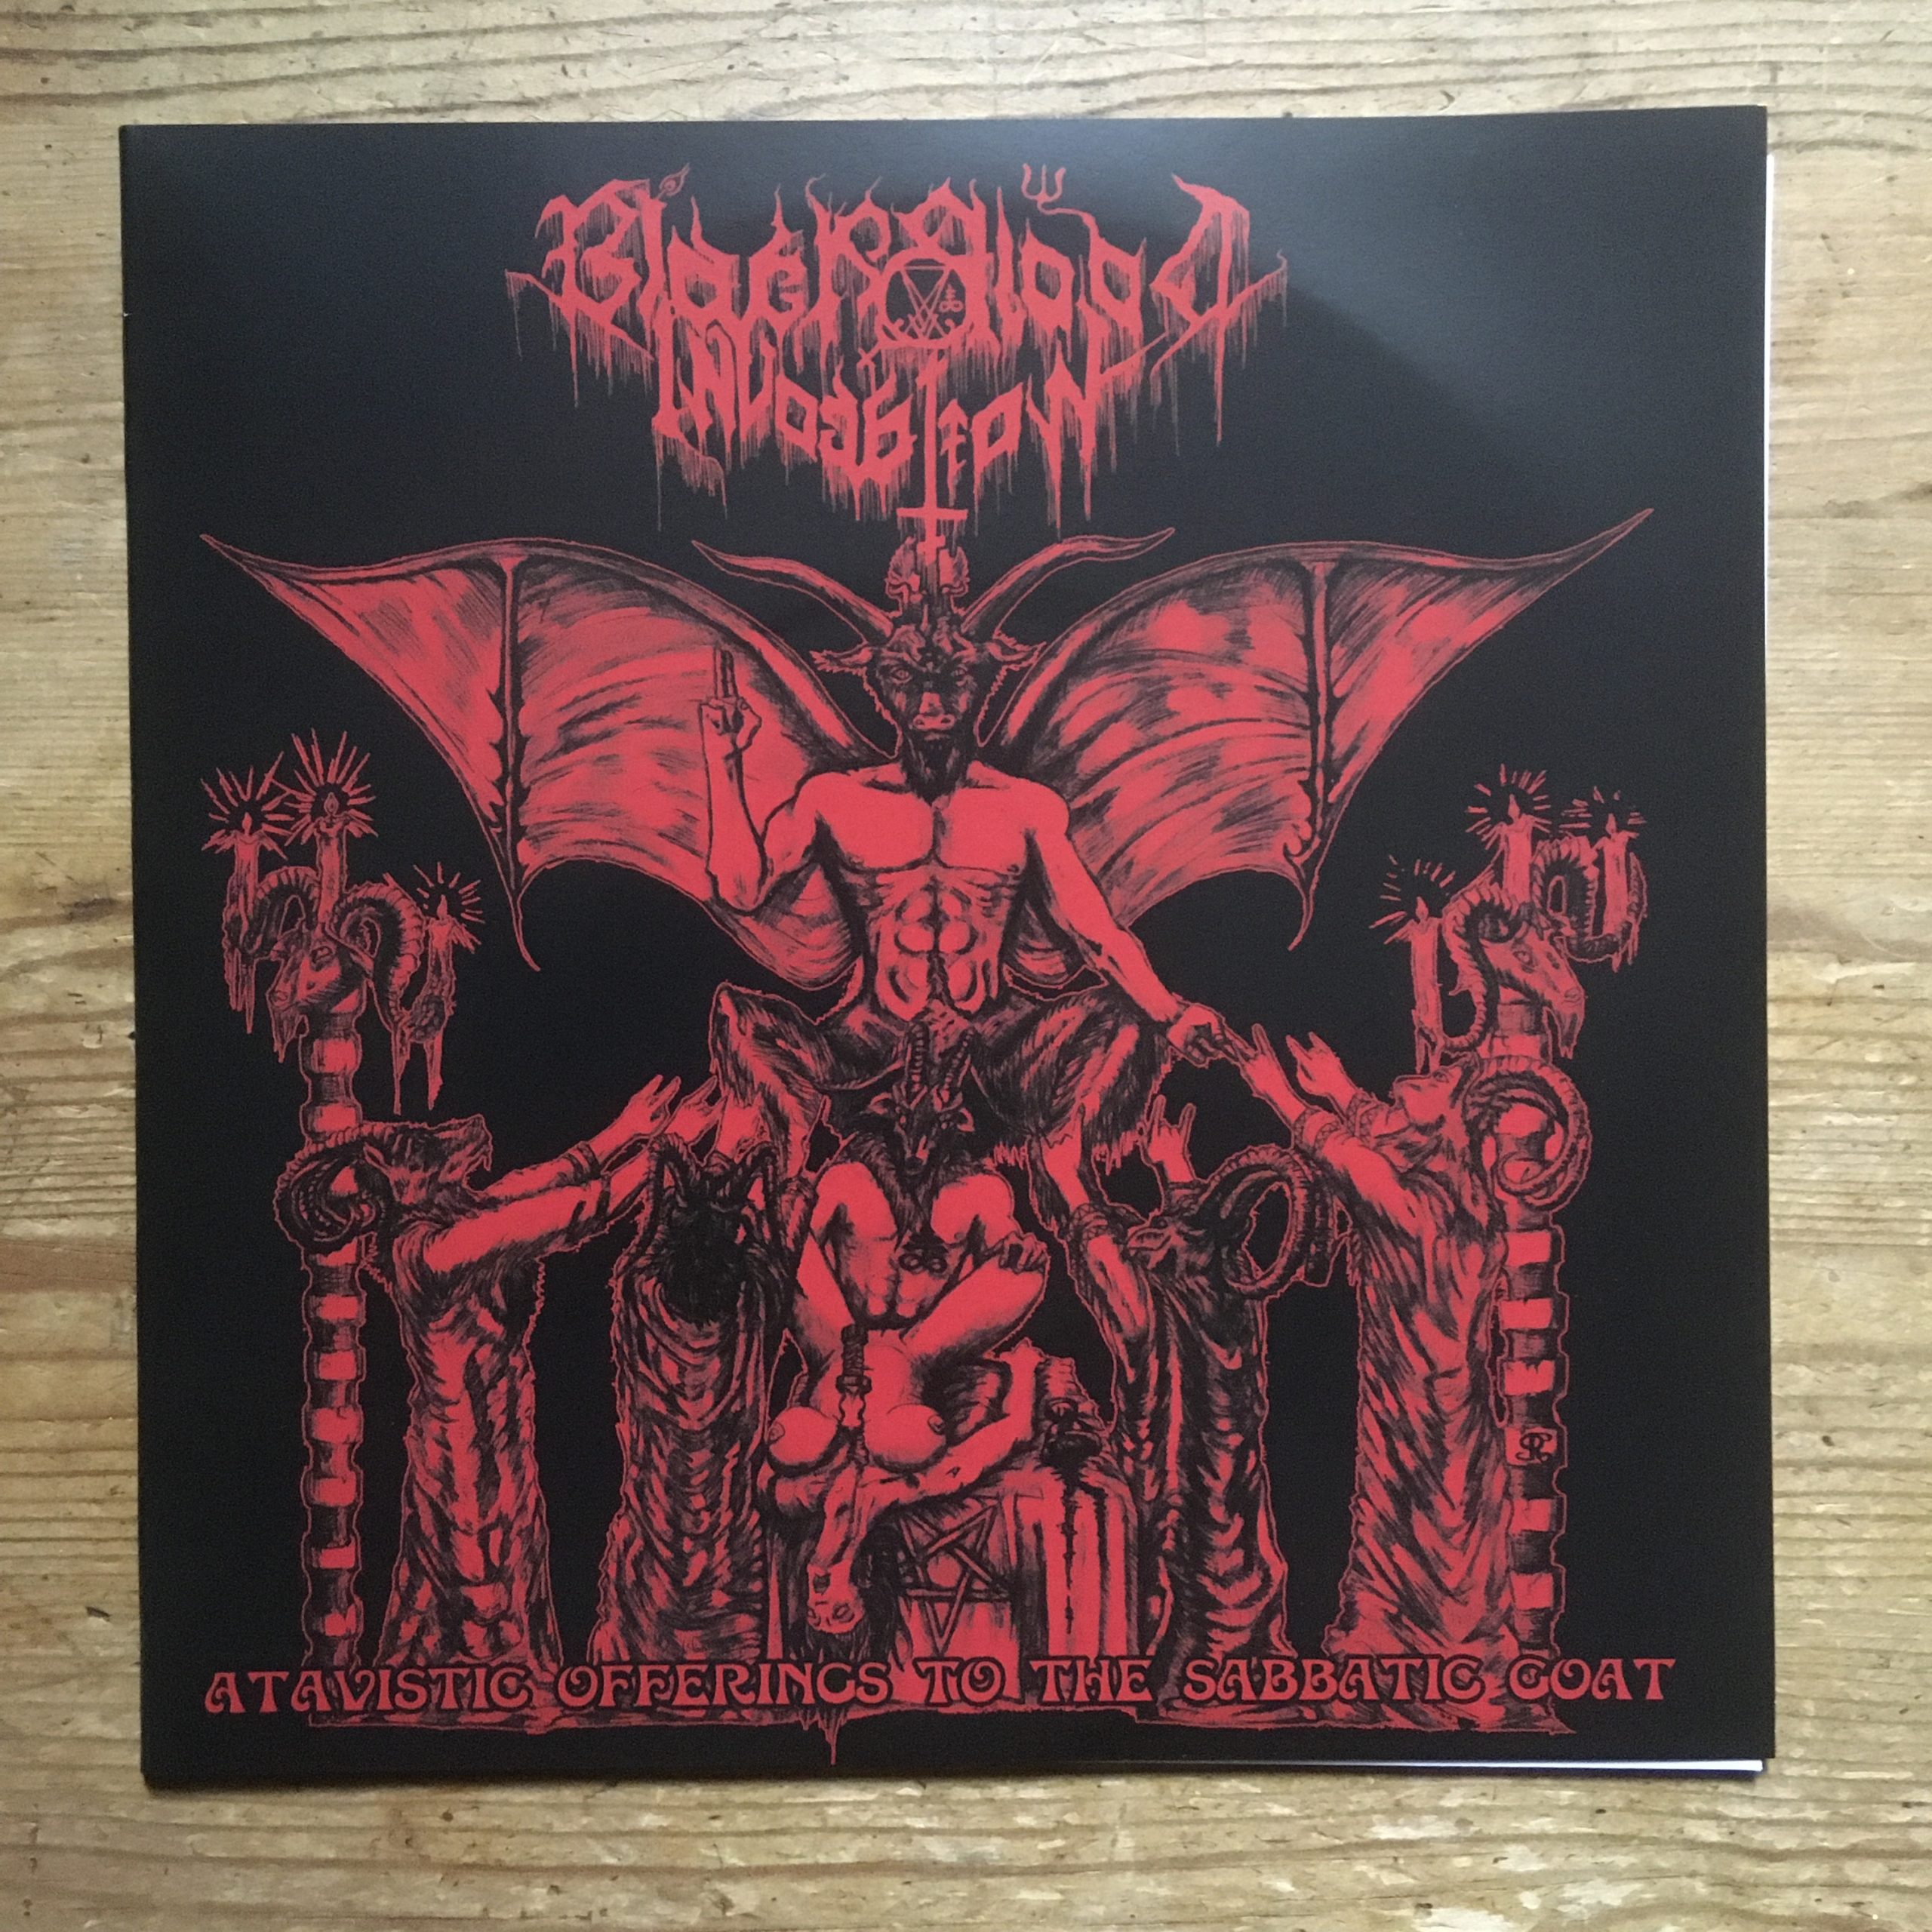 Photo of the Black Blood Invocation - "Atavistic Offerings to the Sabbatic Goat" EP (Black vinyl)